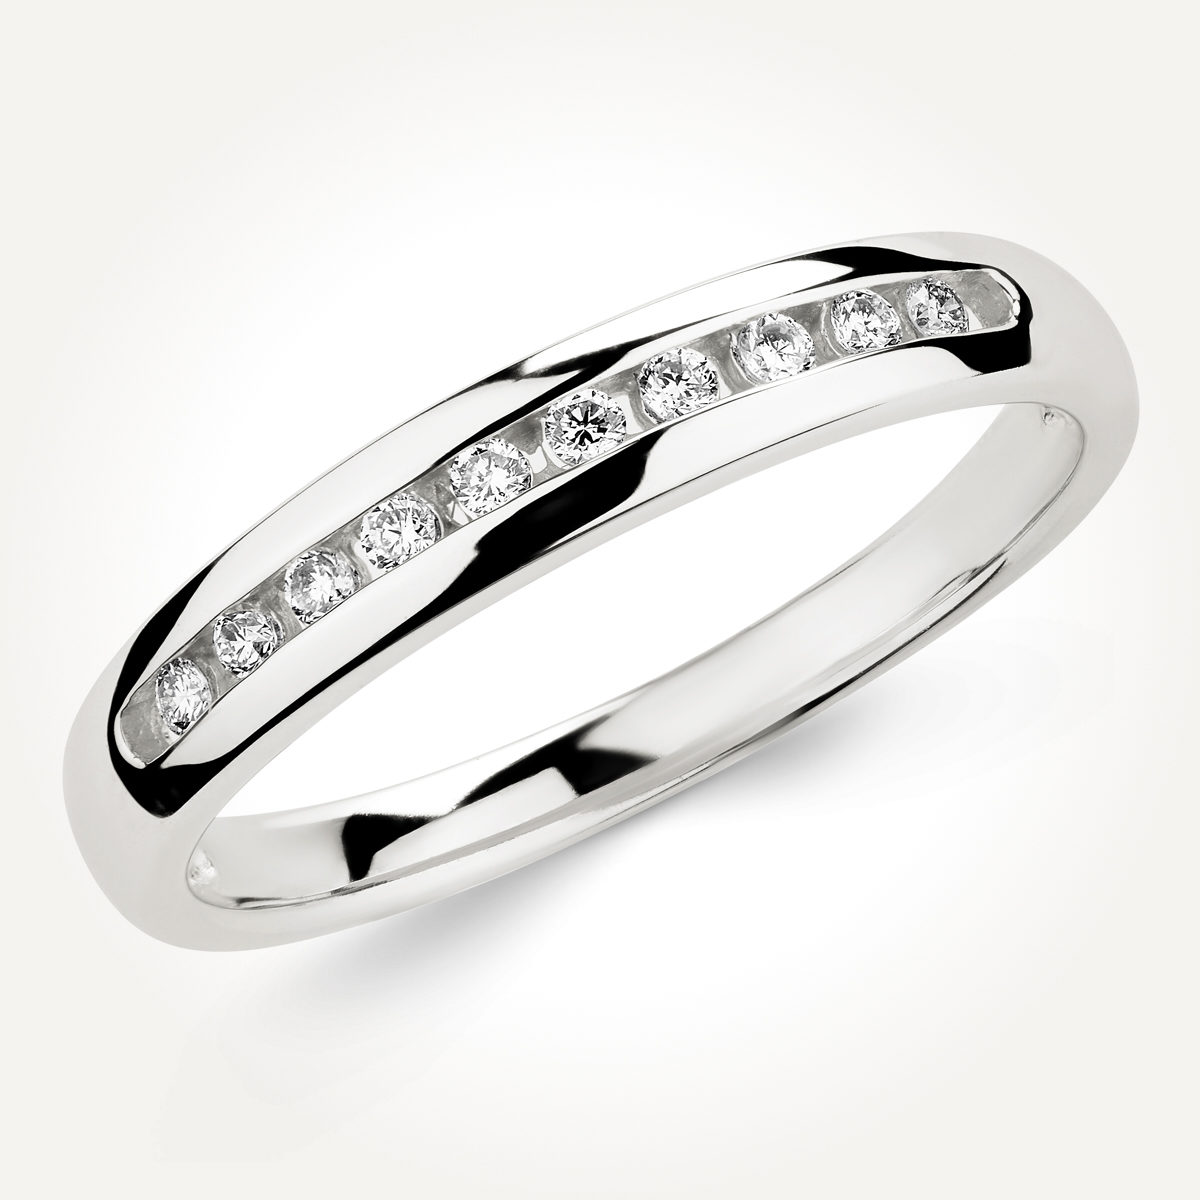 14KT White Gold Channel Set Band